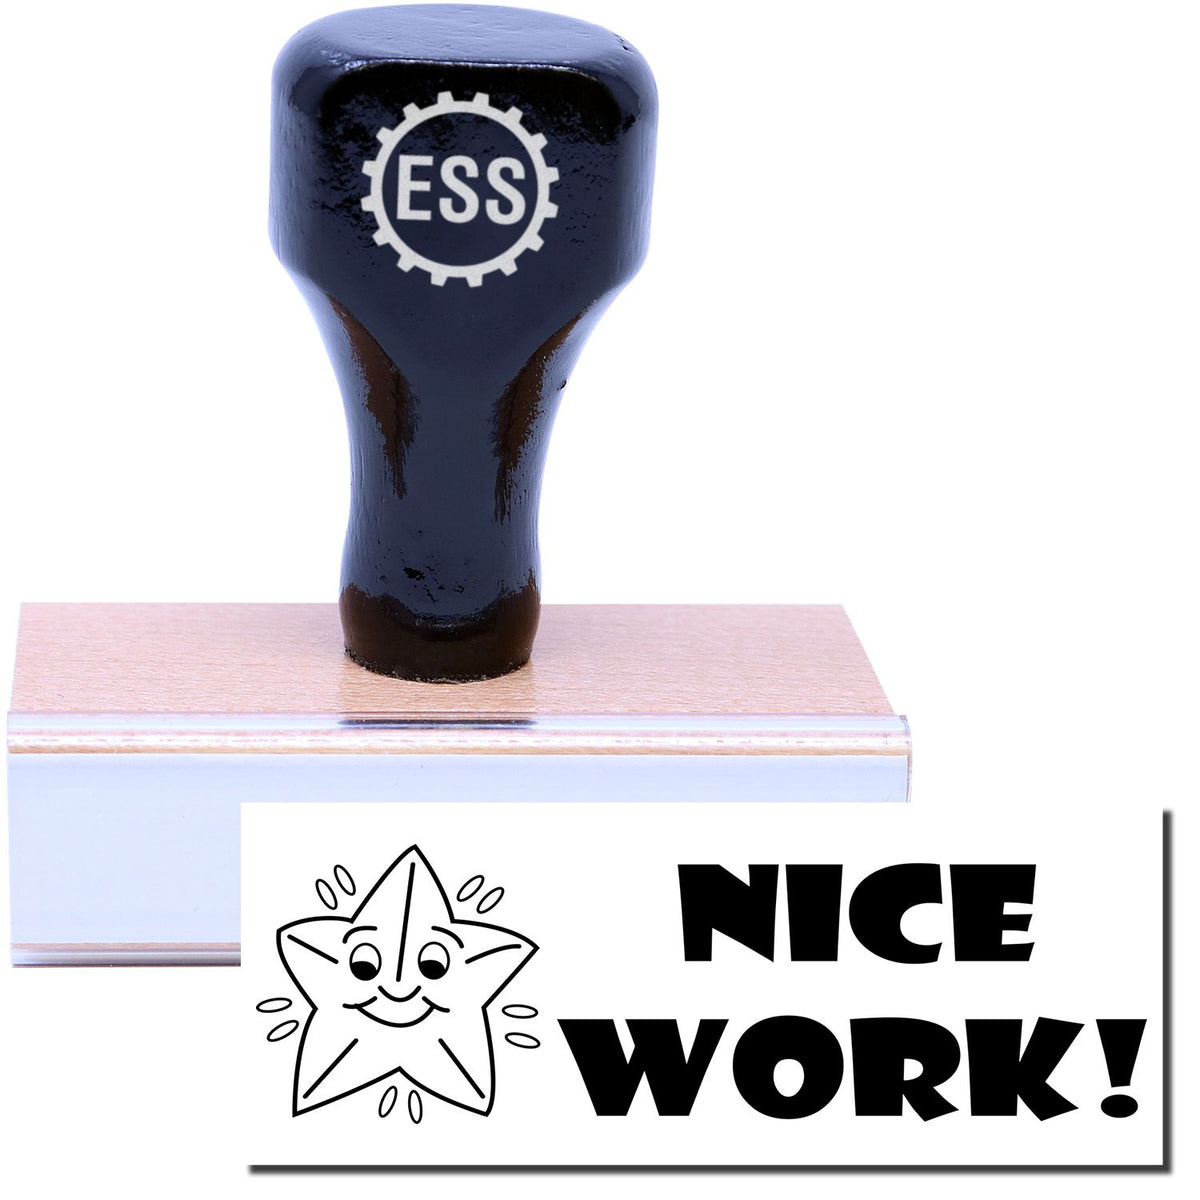 A stock office rubber stamp with a stamped image showing how the text &quot;NICE WORK!&quot; in bold font and a smiling starfish image is displayed after stamping.